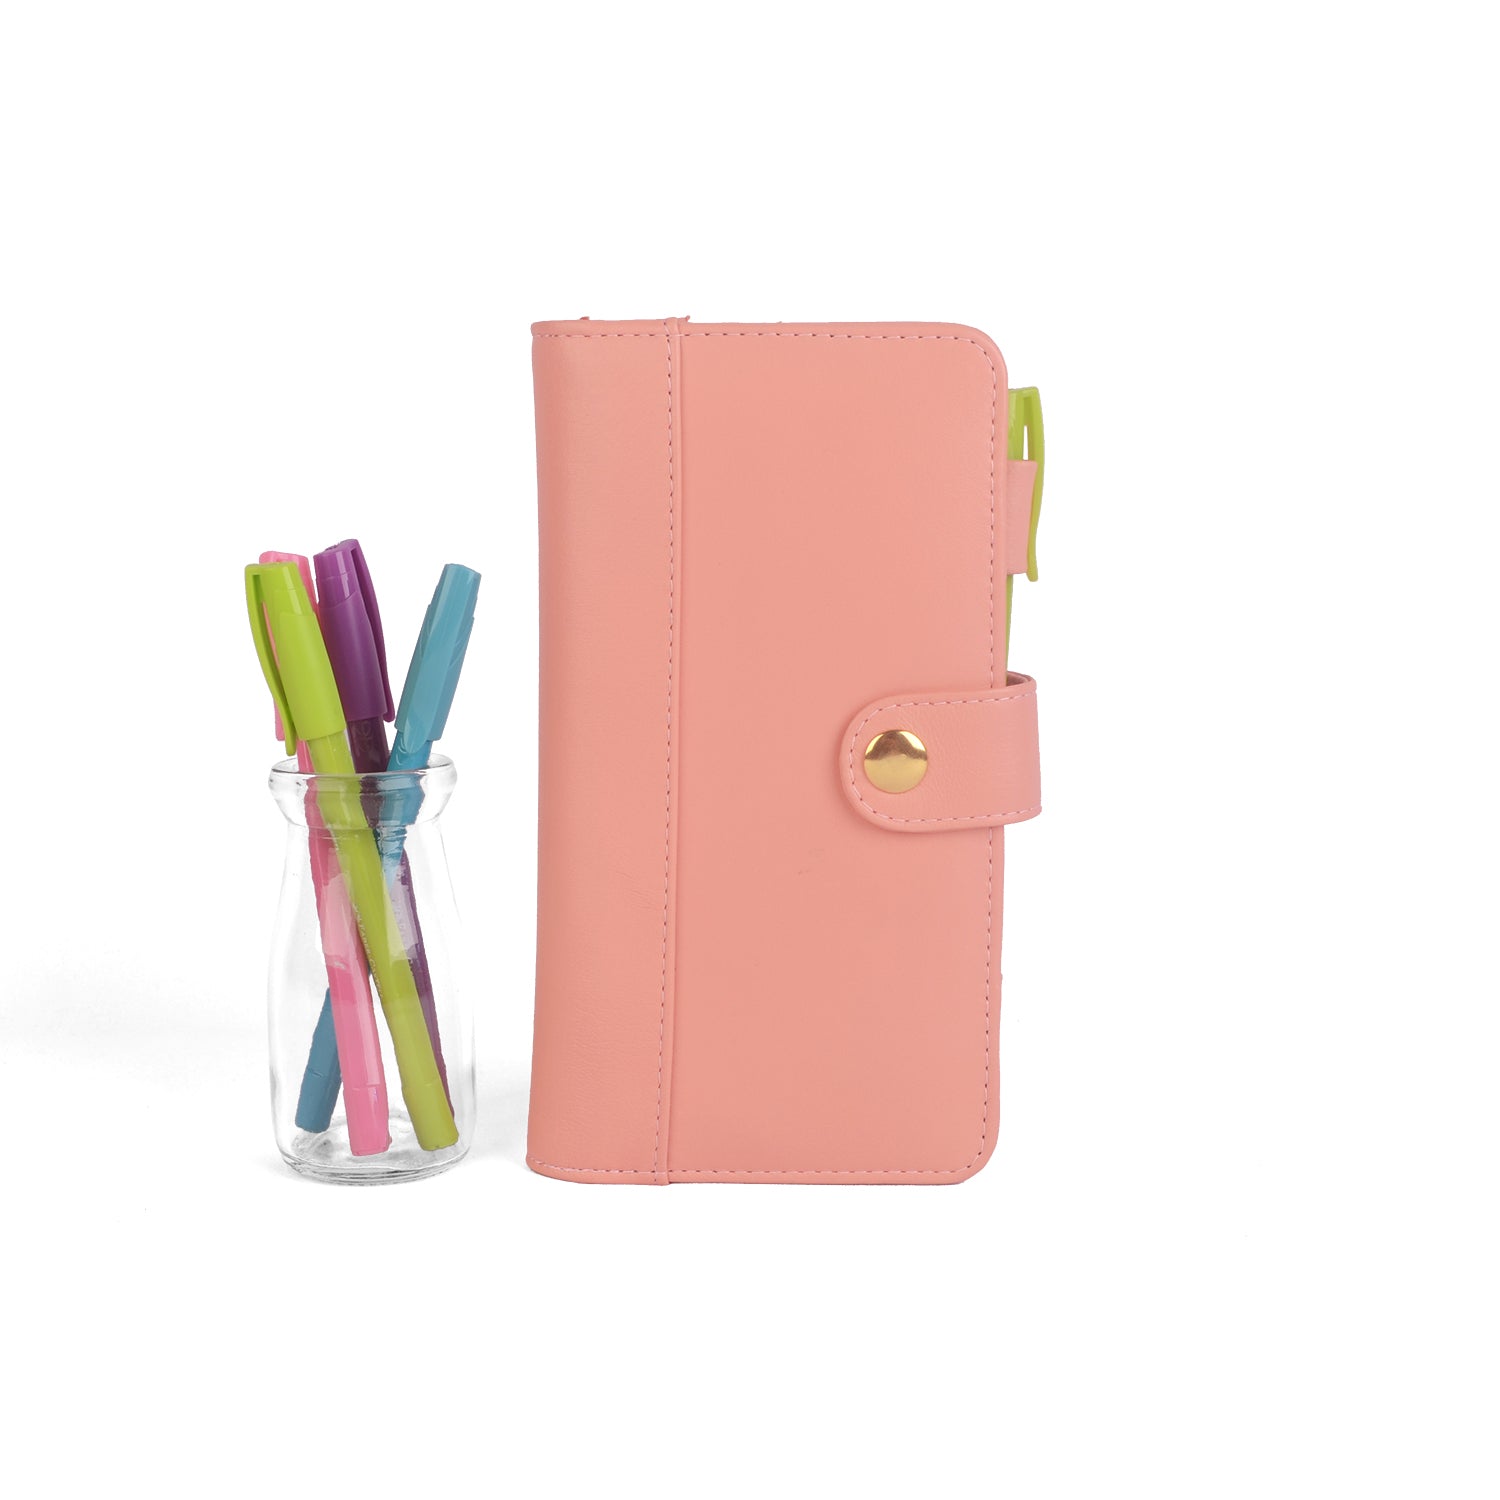  Hobonichi weeks cover Hobonichi weeks mega 2022 cover on cover  Day planner wallets for women with pockets. Hobonichi accessories (Ruby) :  Office Products